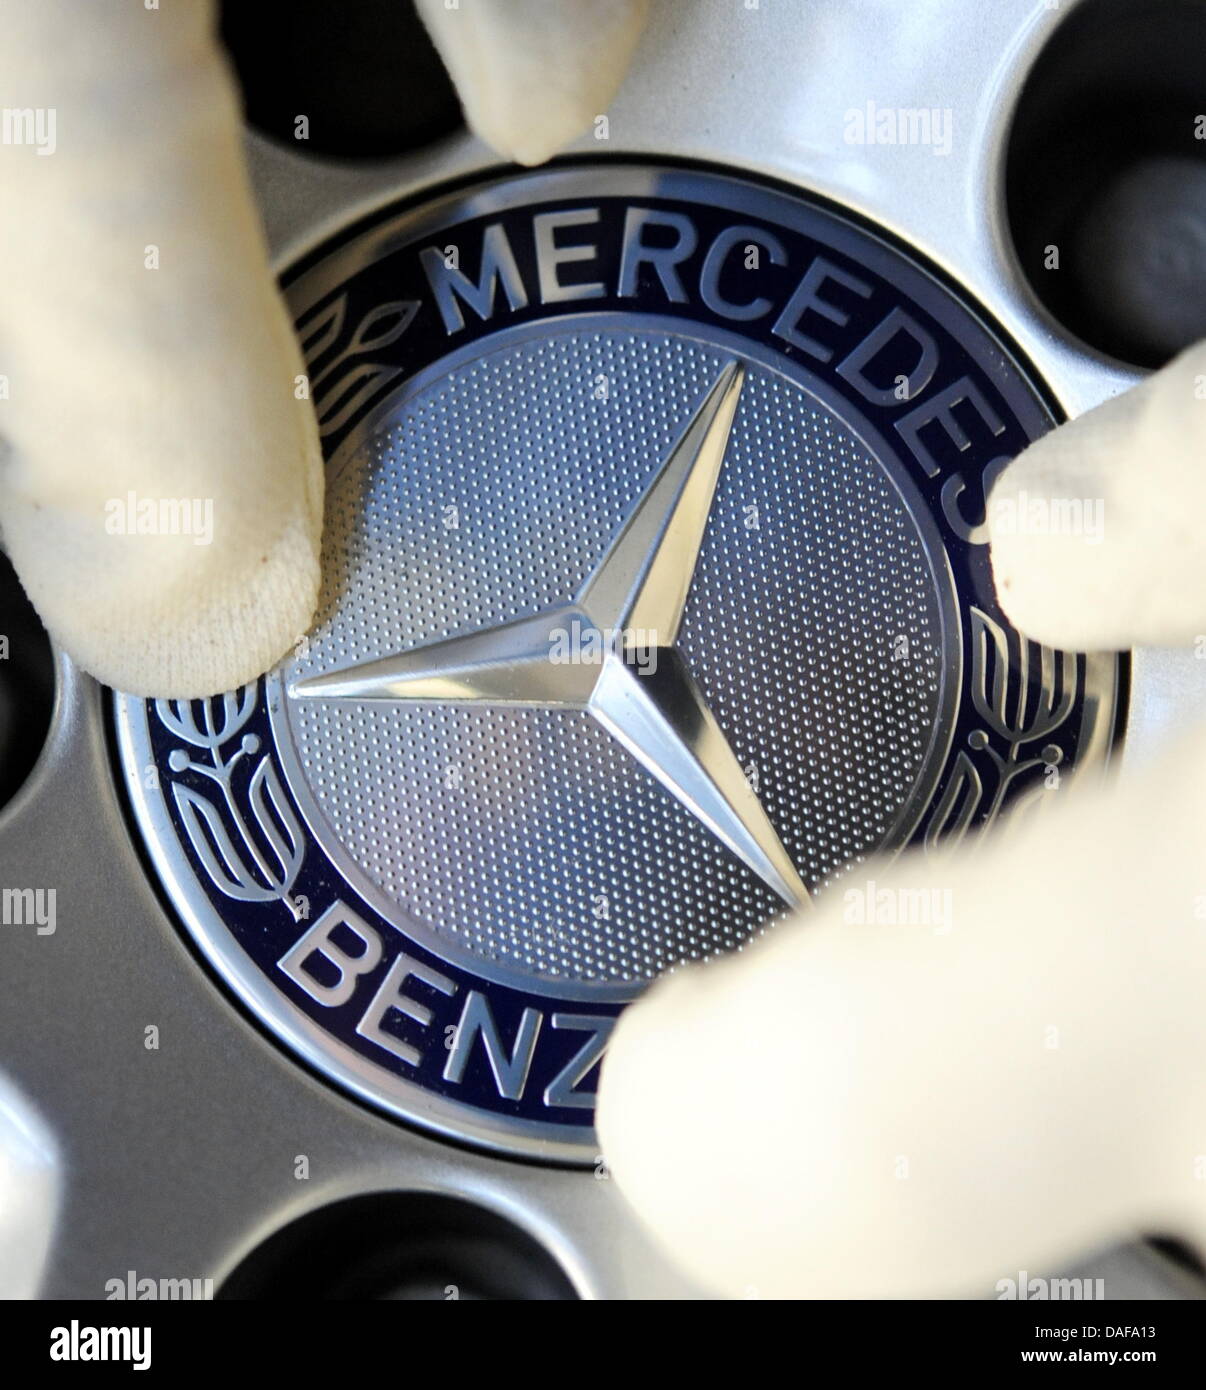 A file picture shows the logo of Mercedes-Benz during assemblage at a plant in Sindelfingen, Germany, 1 February 2011. The Stuttgart-based car company wants to present a positive annual balance at their press conference on 16 Feruary. Daimler wants to beat their production record of 2007. Photo: Bernd Weissbrod Stock Photo